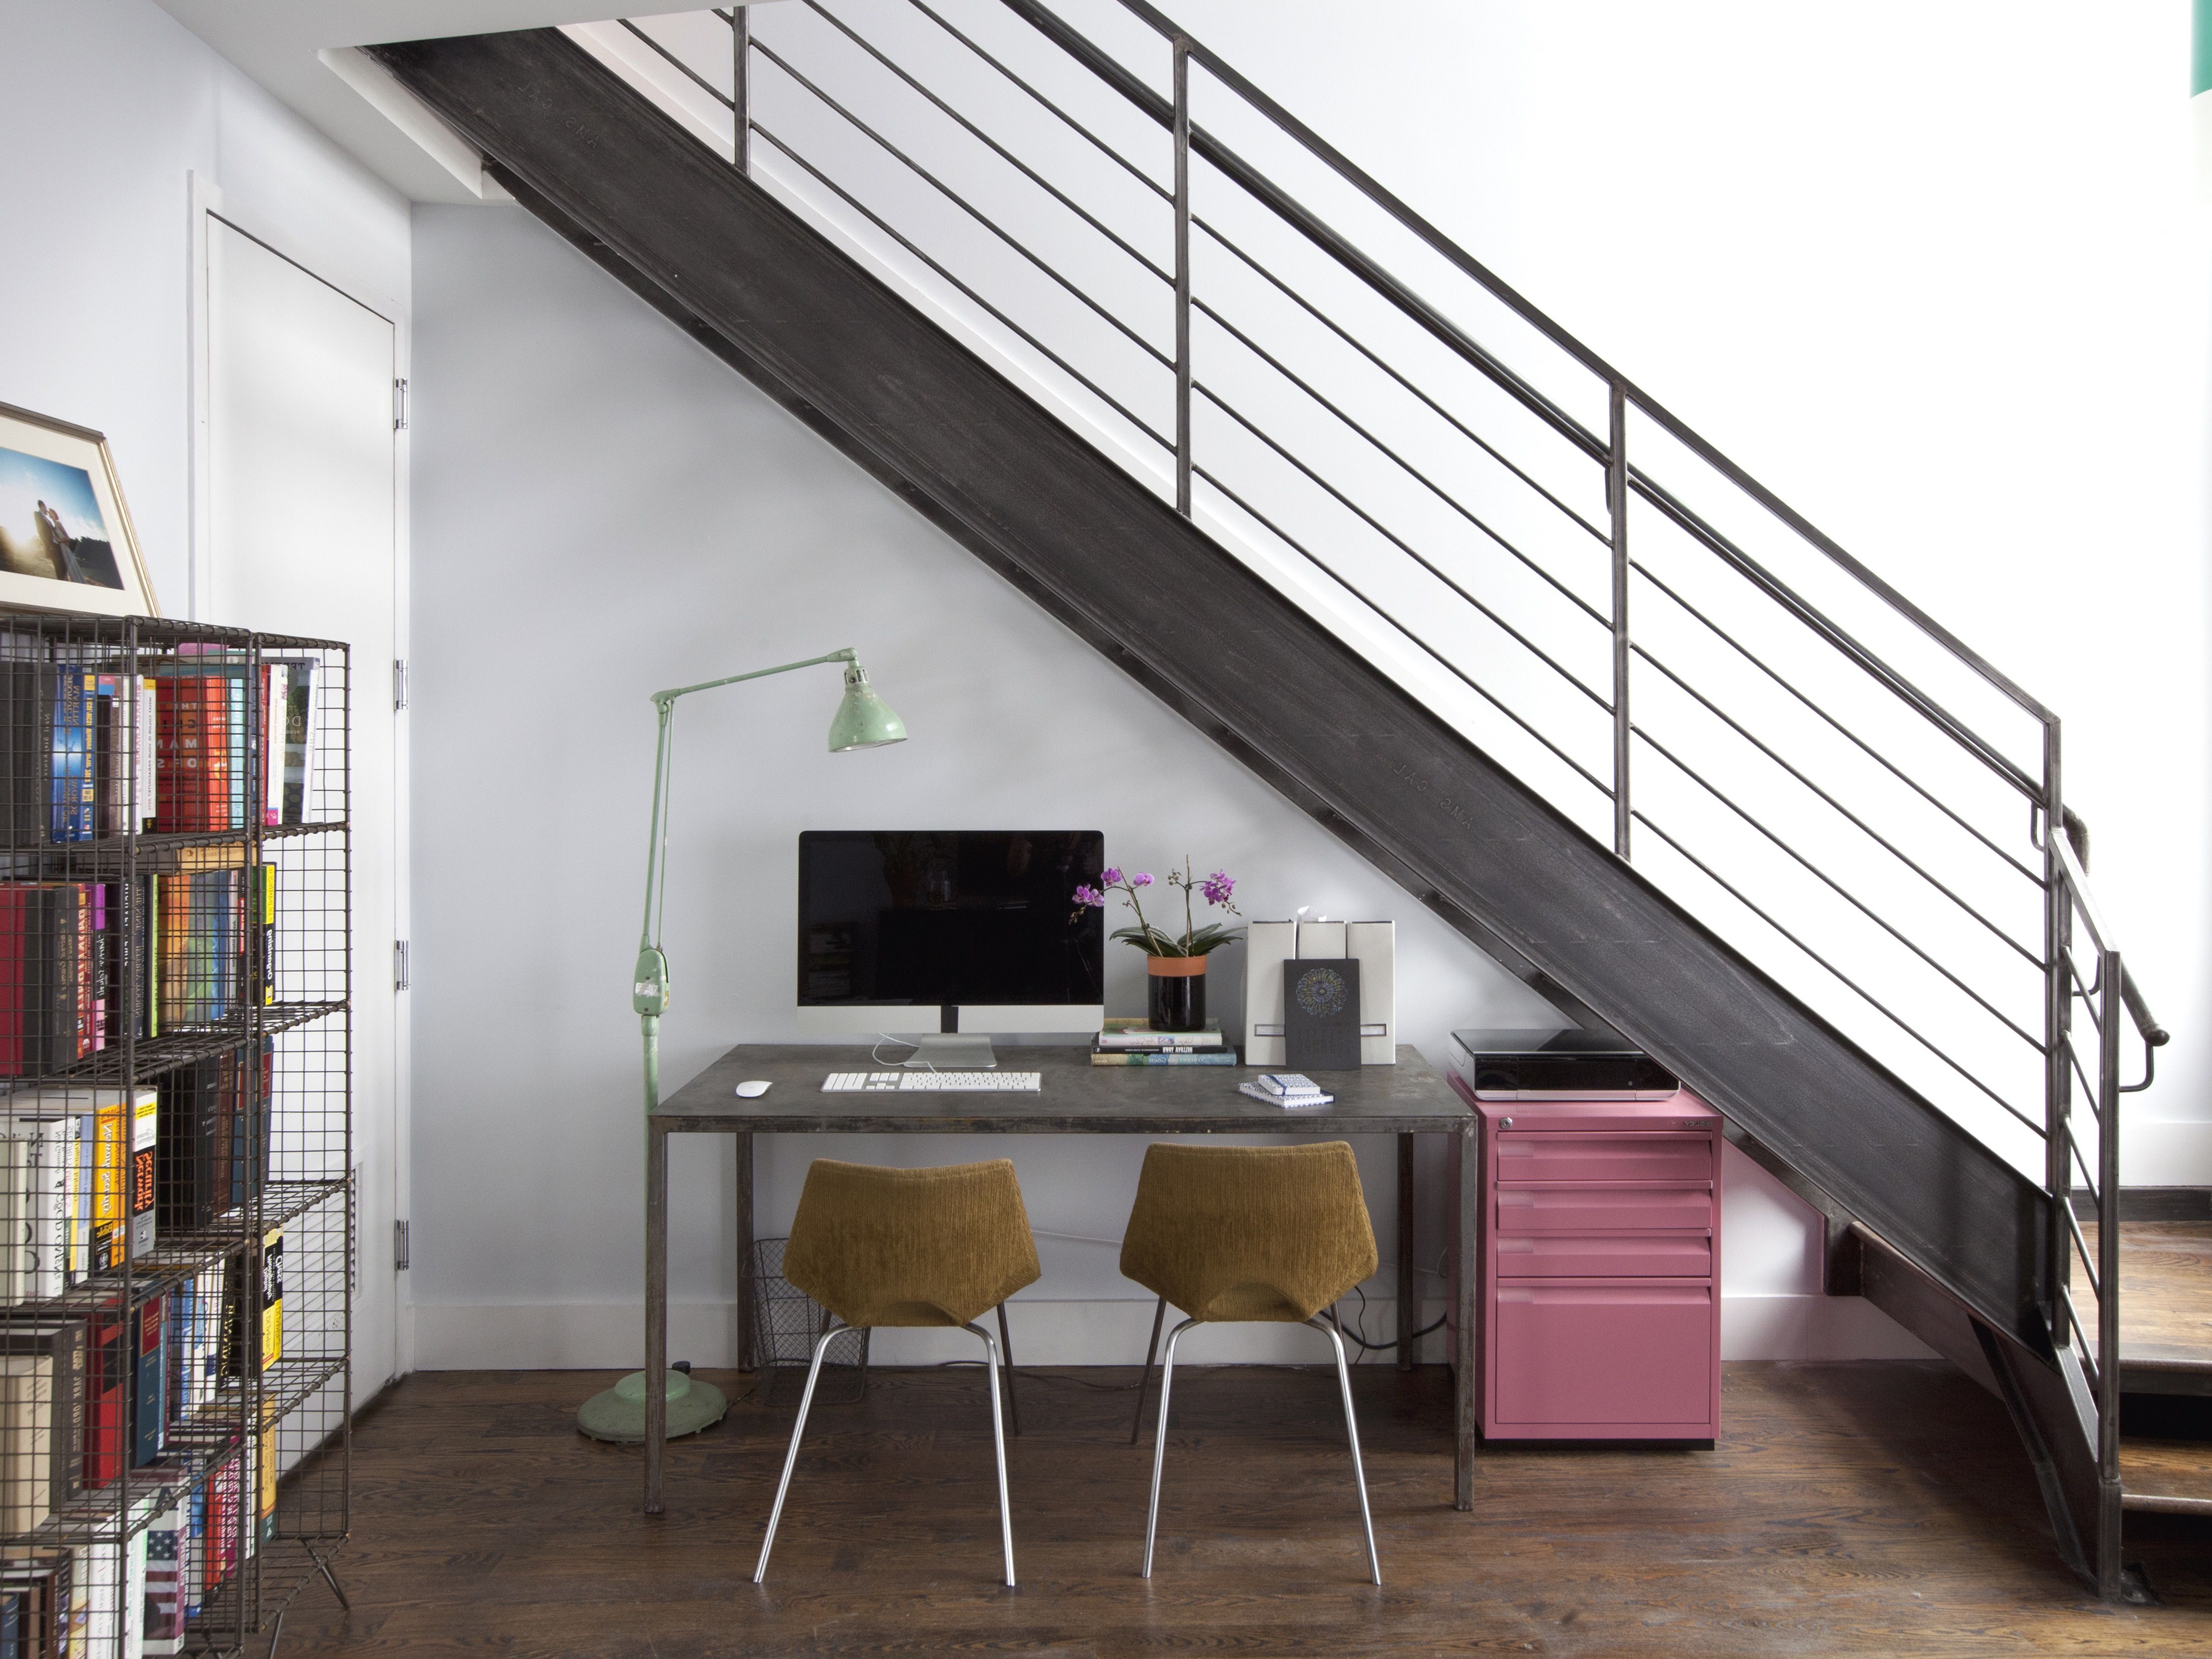 Space Saving Home Office Tucked Underneath Staircase (View 16 of 17)